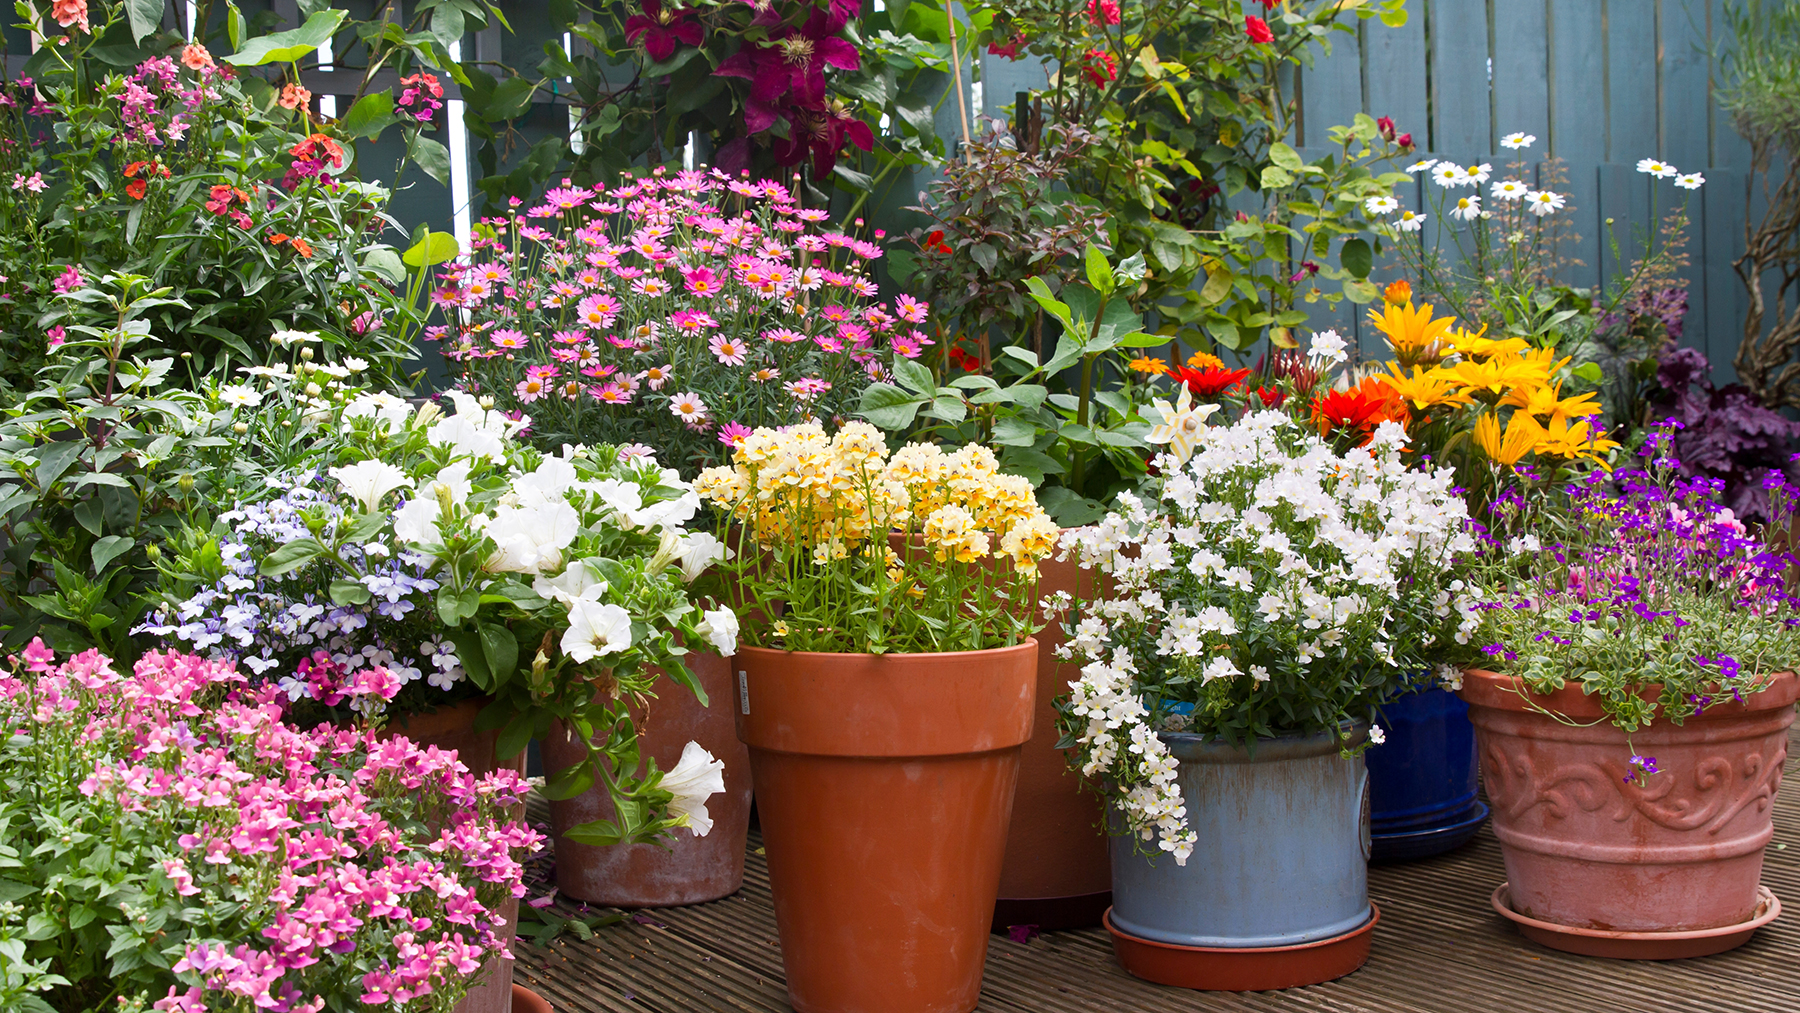 Group of colorful pots with bright flowers in bloom